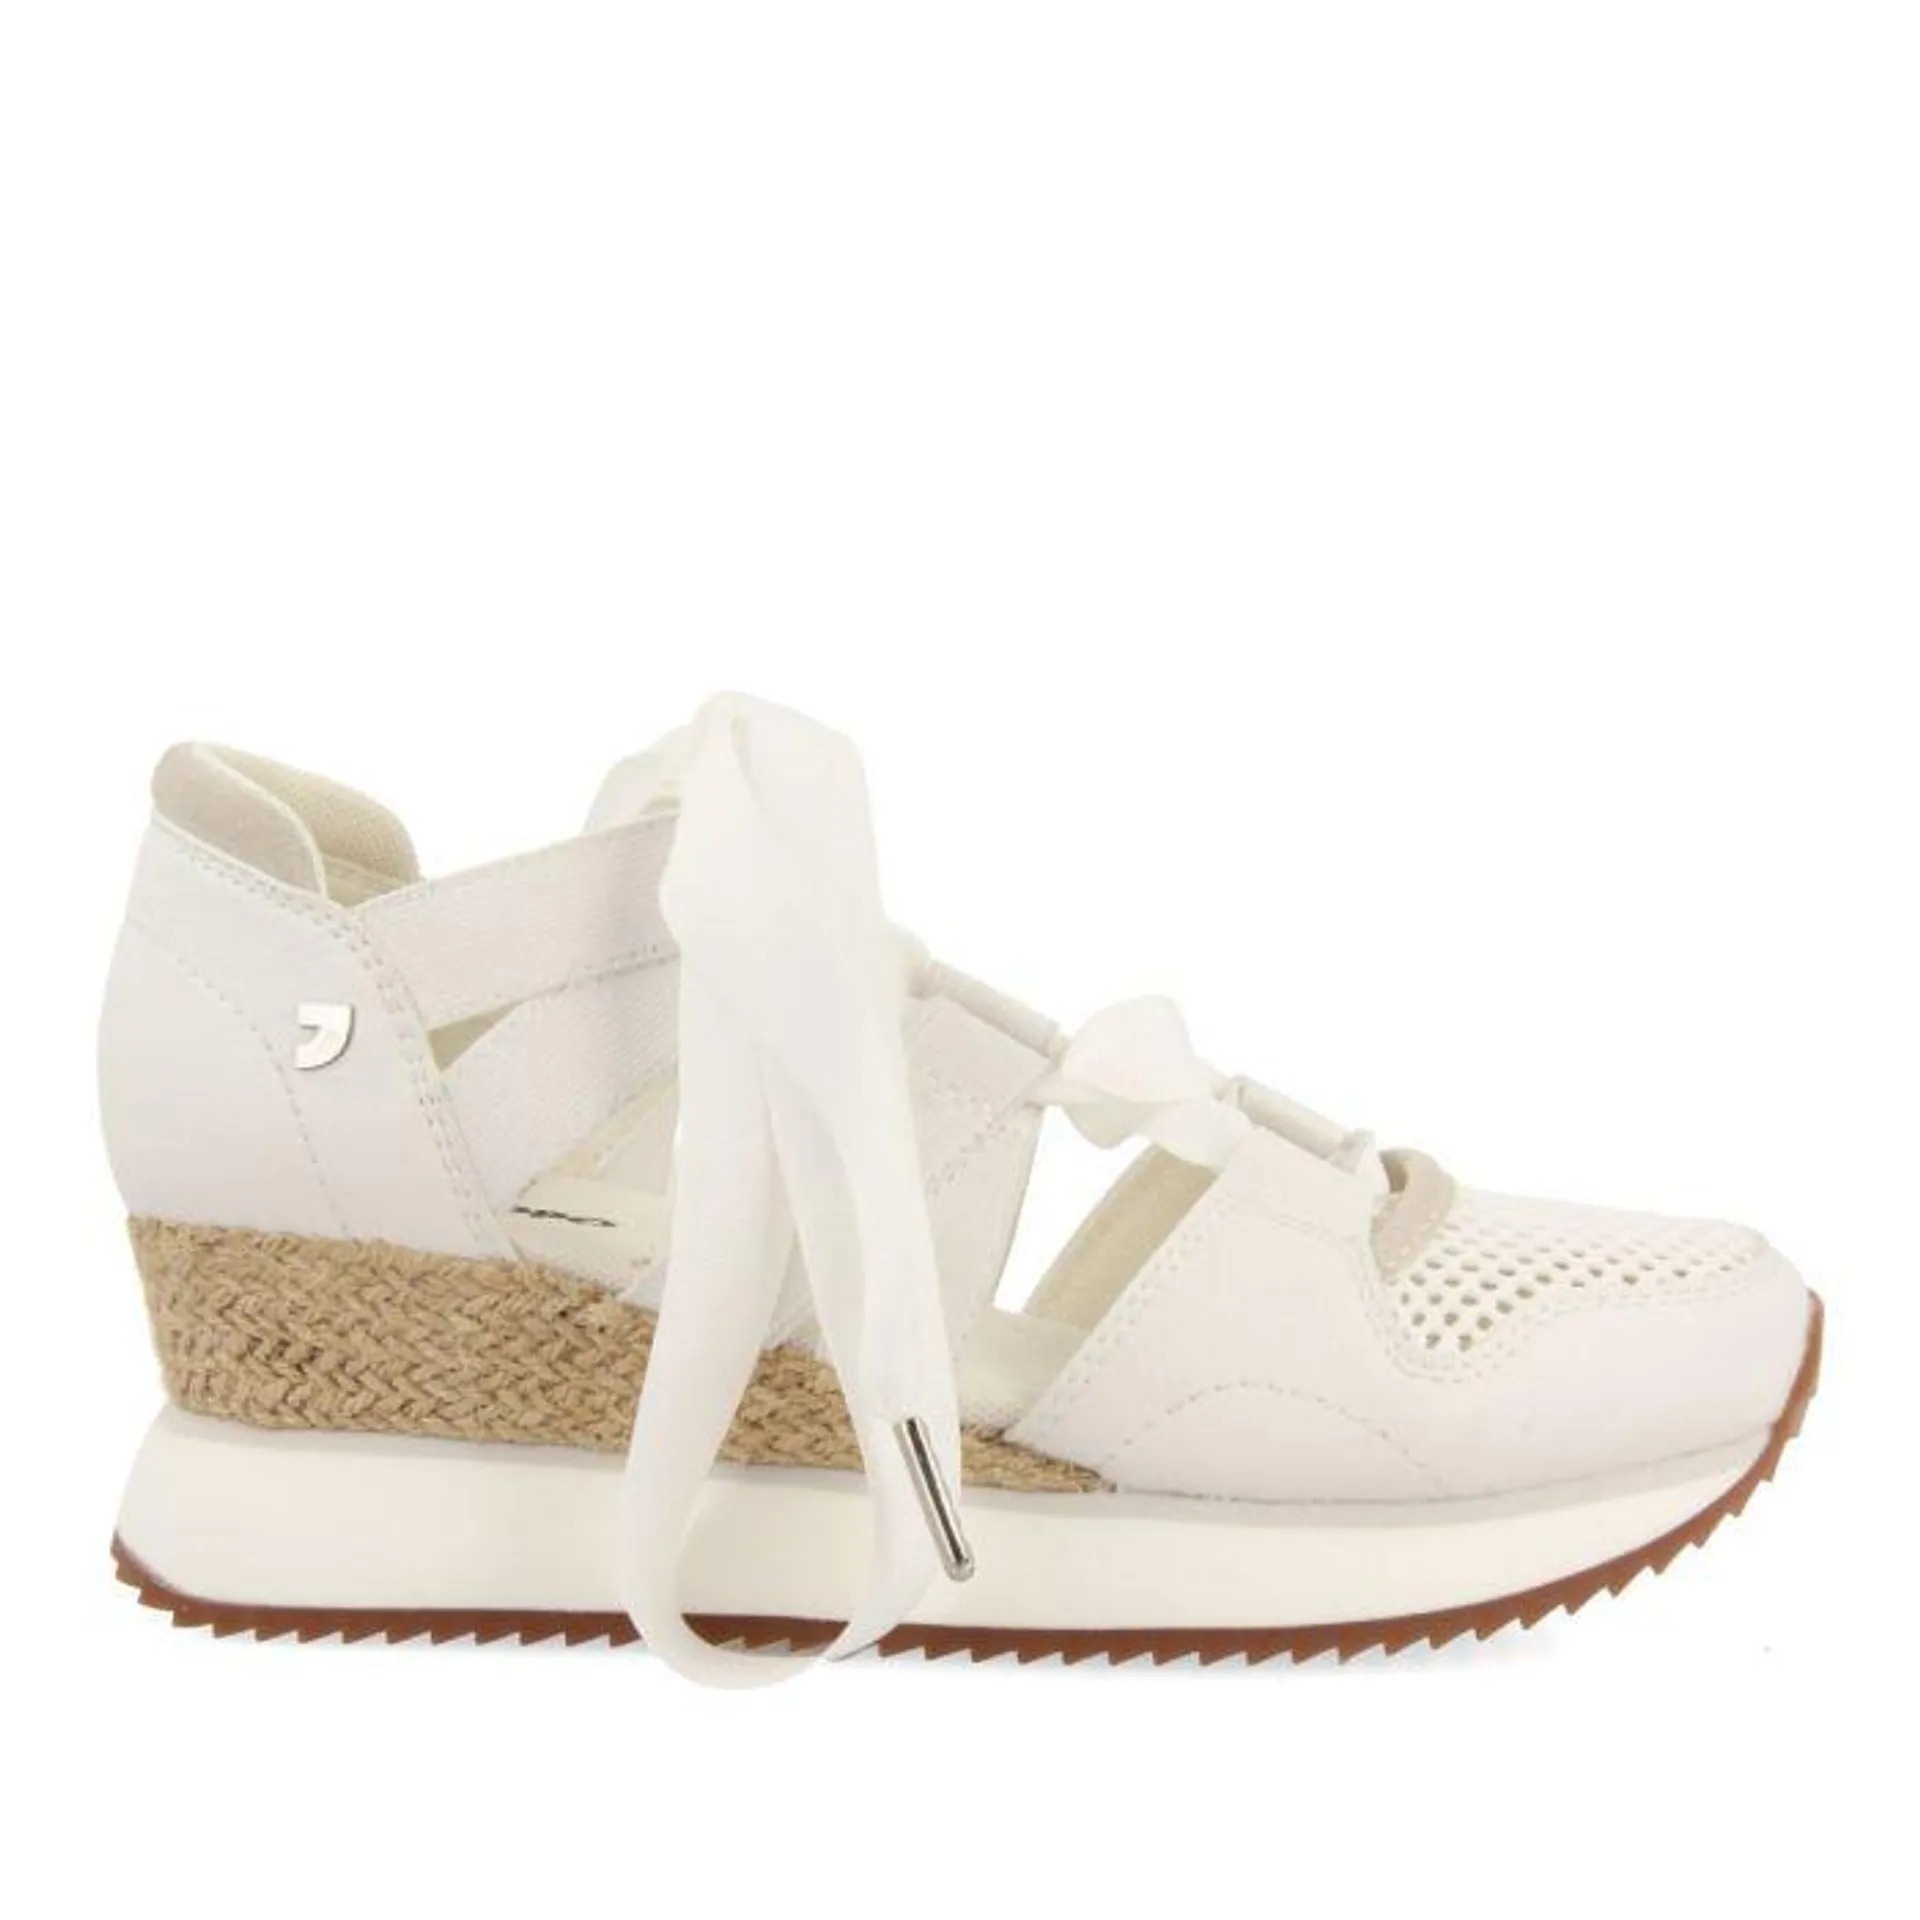 OFF-WHITE SPORTS SANDALS ESPADRILLE TYPE WITH STRAPS FOR WOMEN MUIR